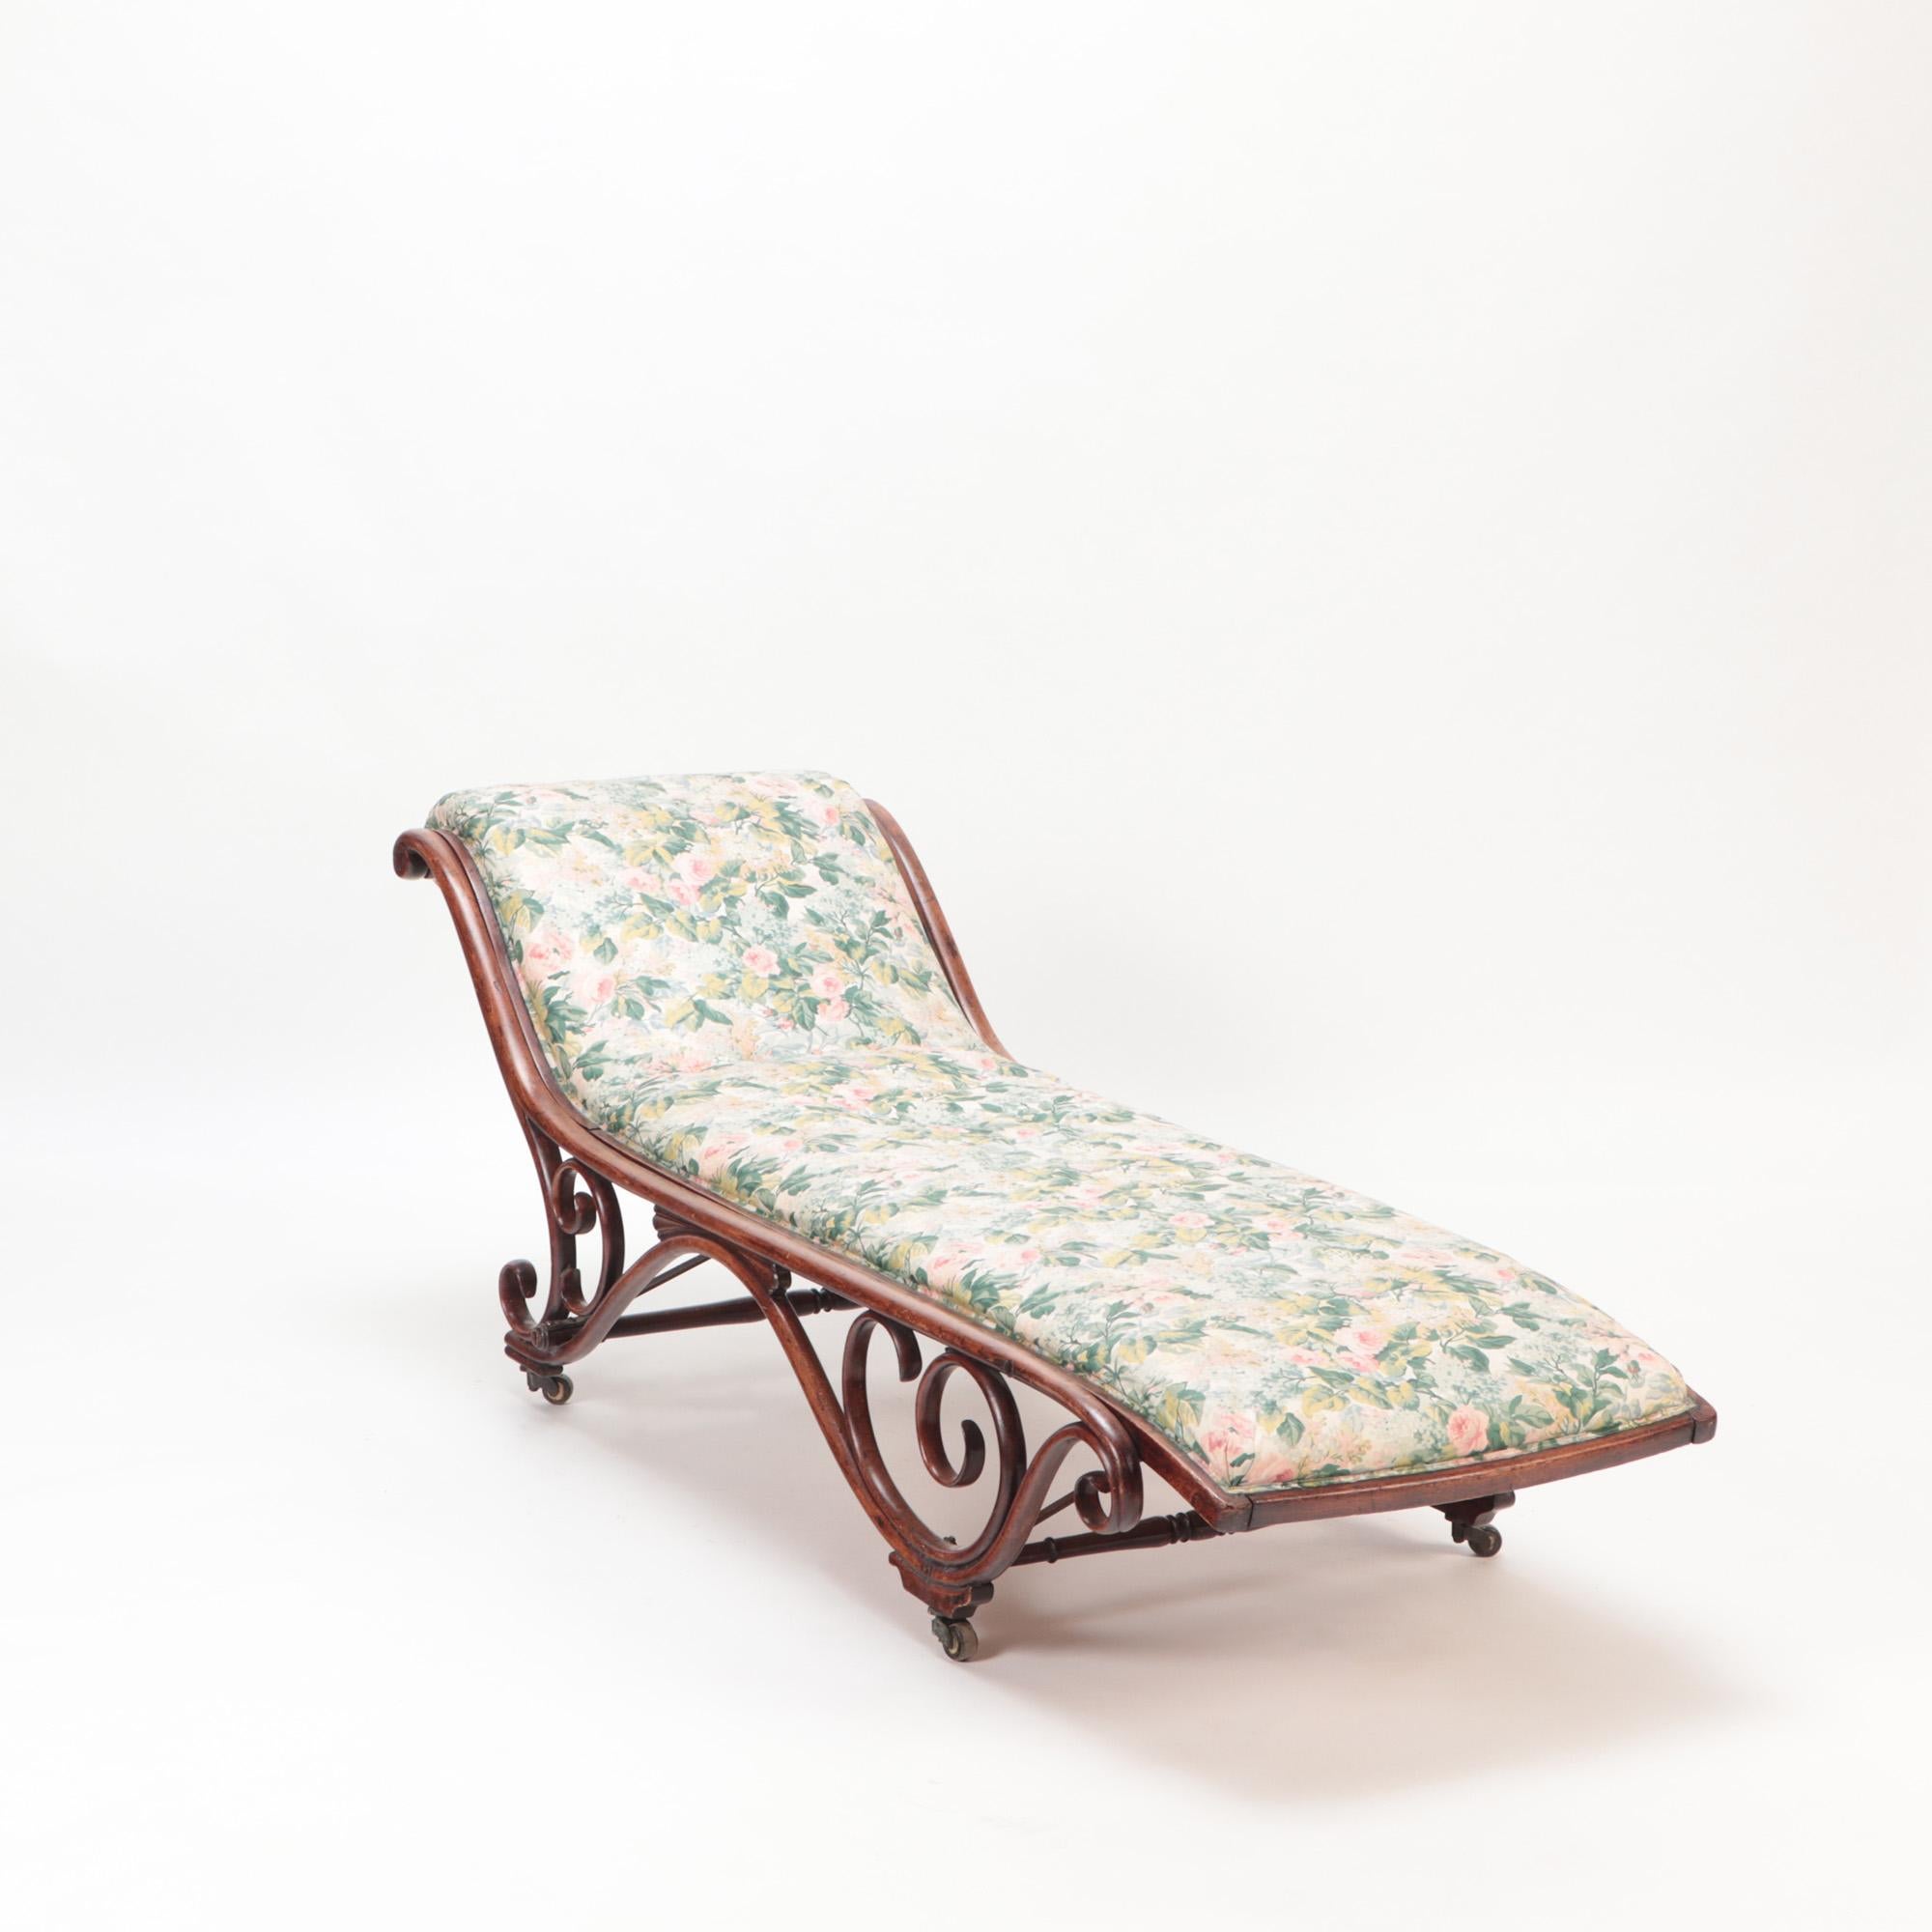 A bentwood and upholstered chaise lounge by Thonet circa 1900.